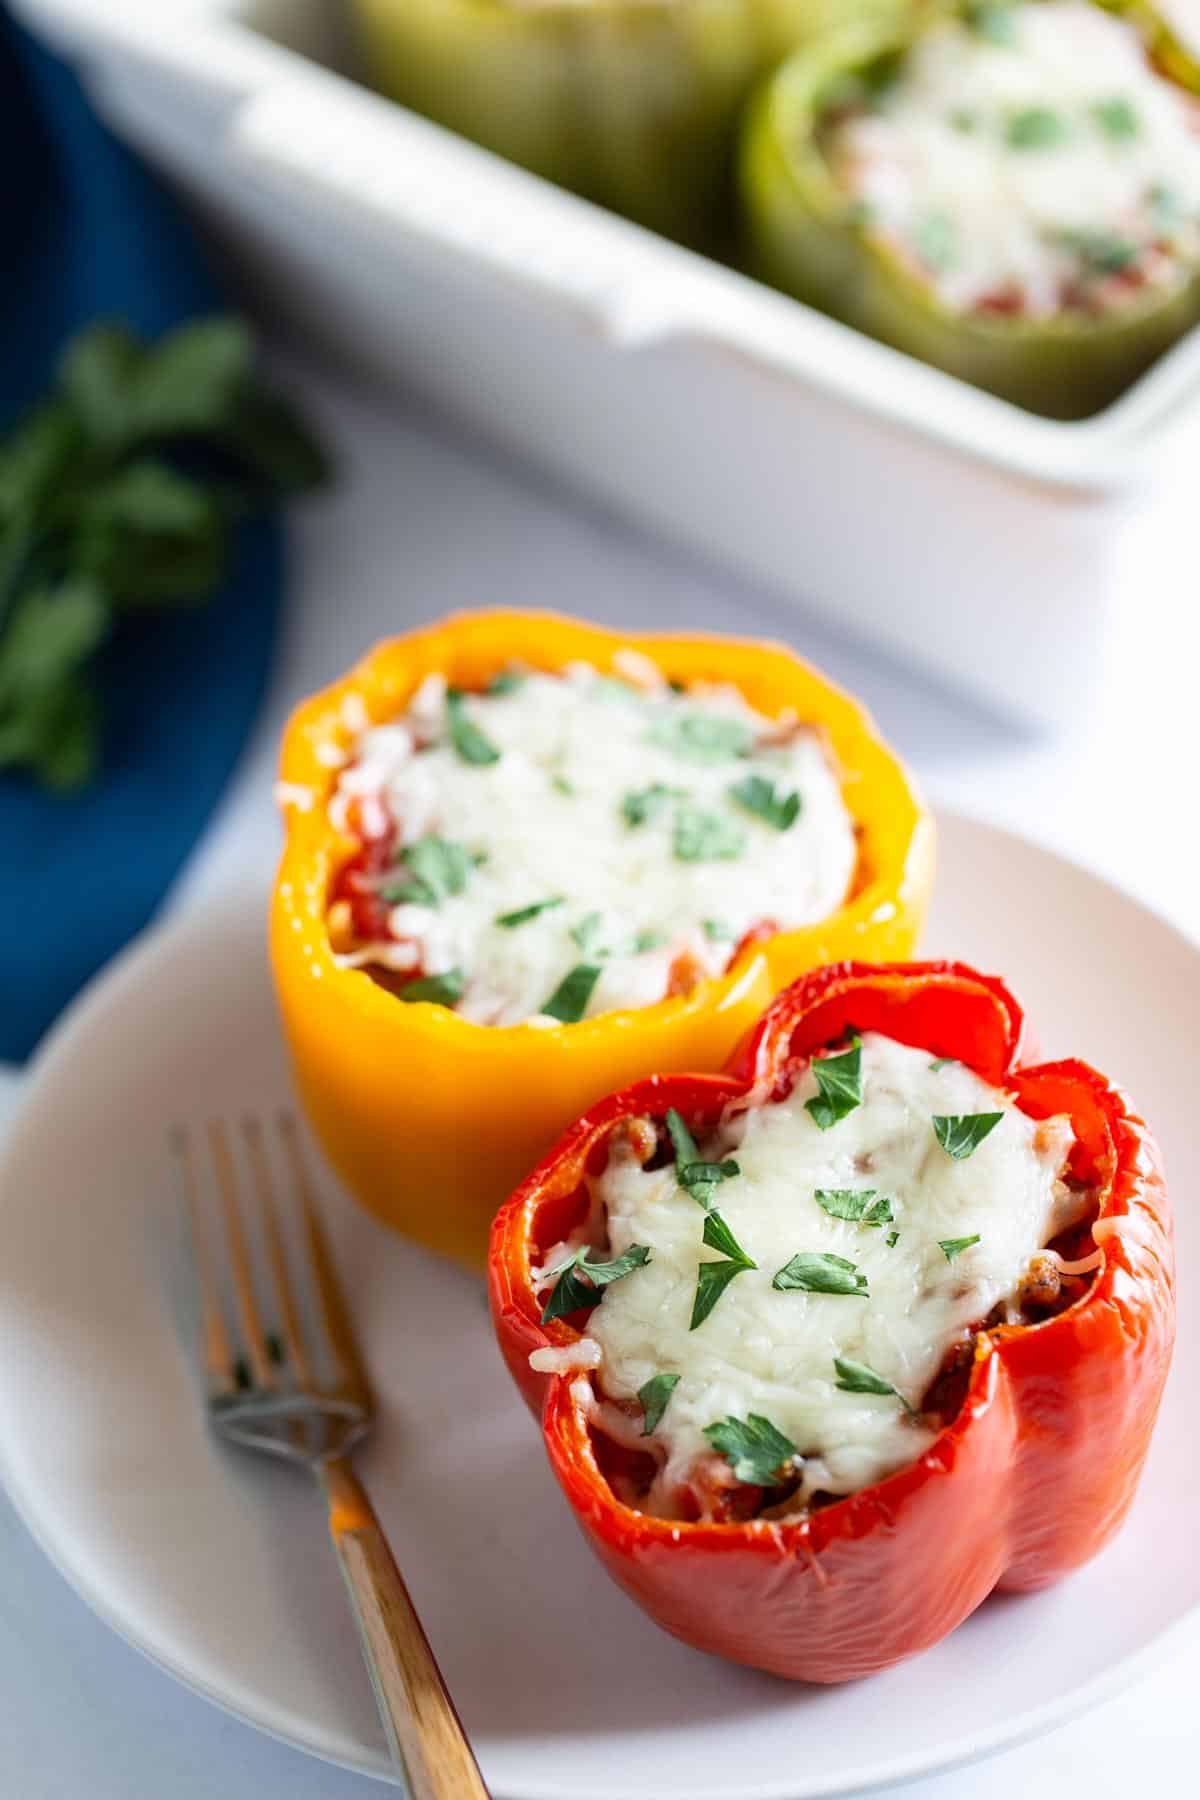 Two stuffed bell peppers on a white plate, one yellow and one red, filled with rice, meat, and herbs, topped with melted cheese.